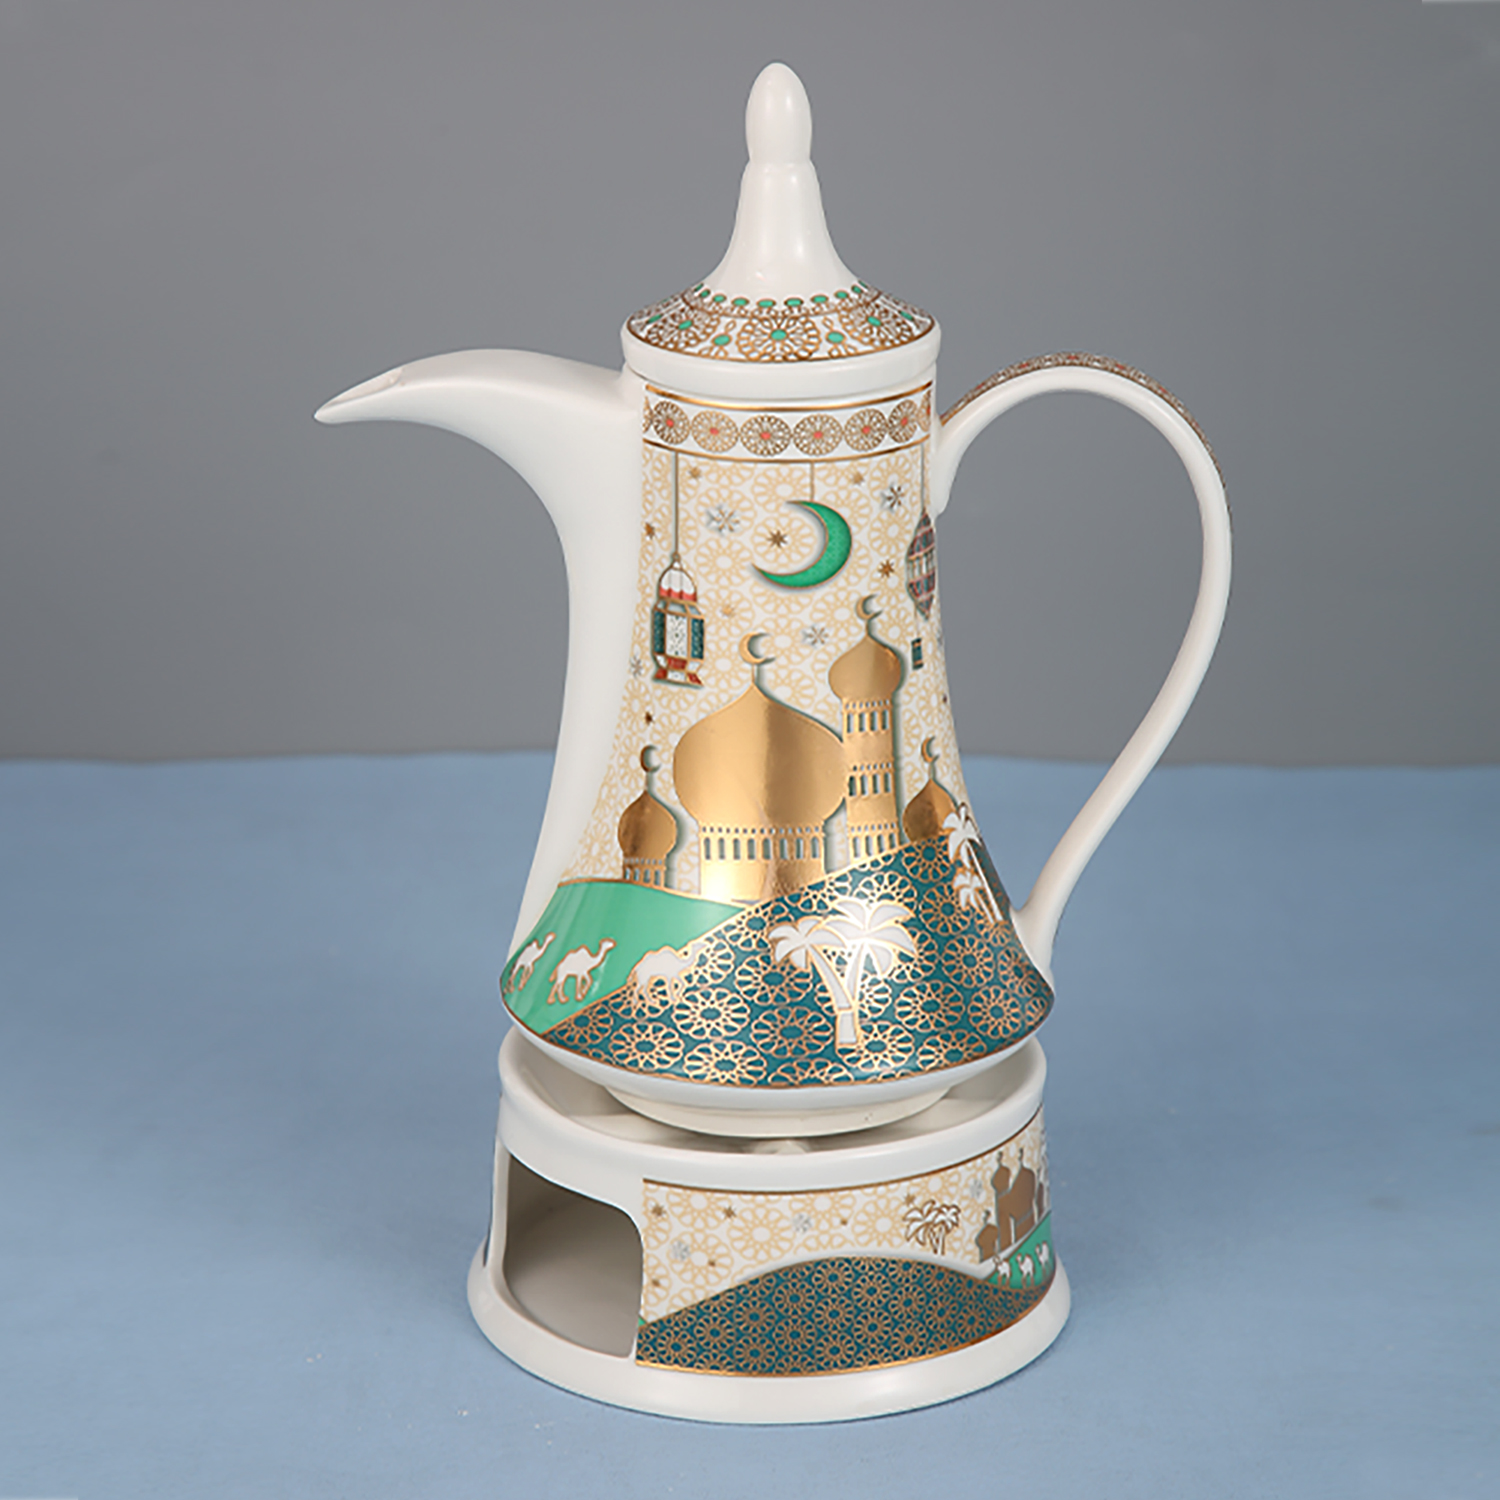 Ramadan Design Arabic Coffee Pot ceramic, Healthy and Extremely Heat Resistant with Candle Warmer, with ramadan design ，gold and green color(L-30*W-7*H-15.5 CM)